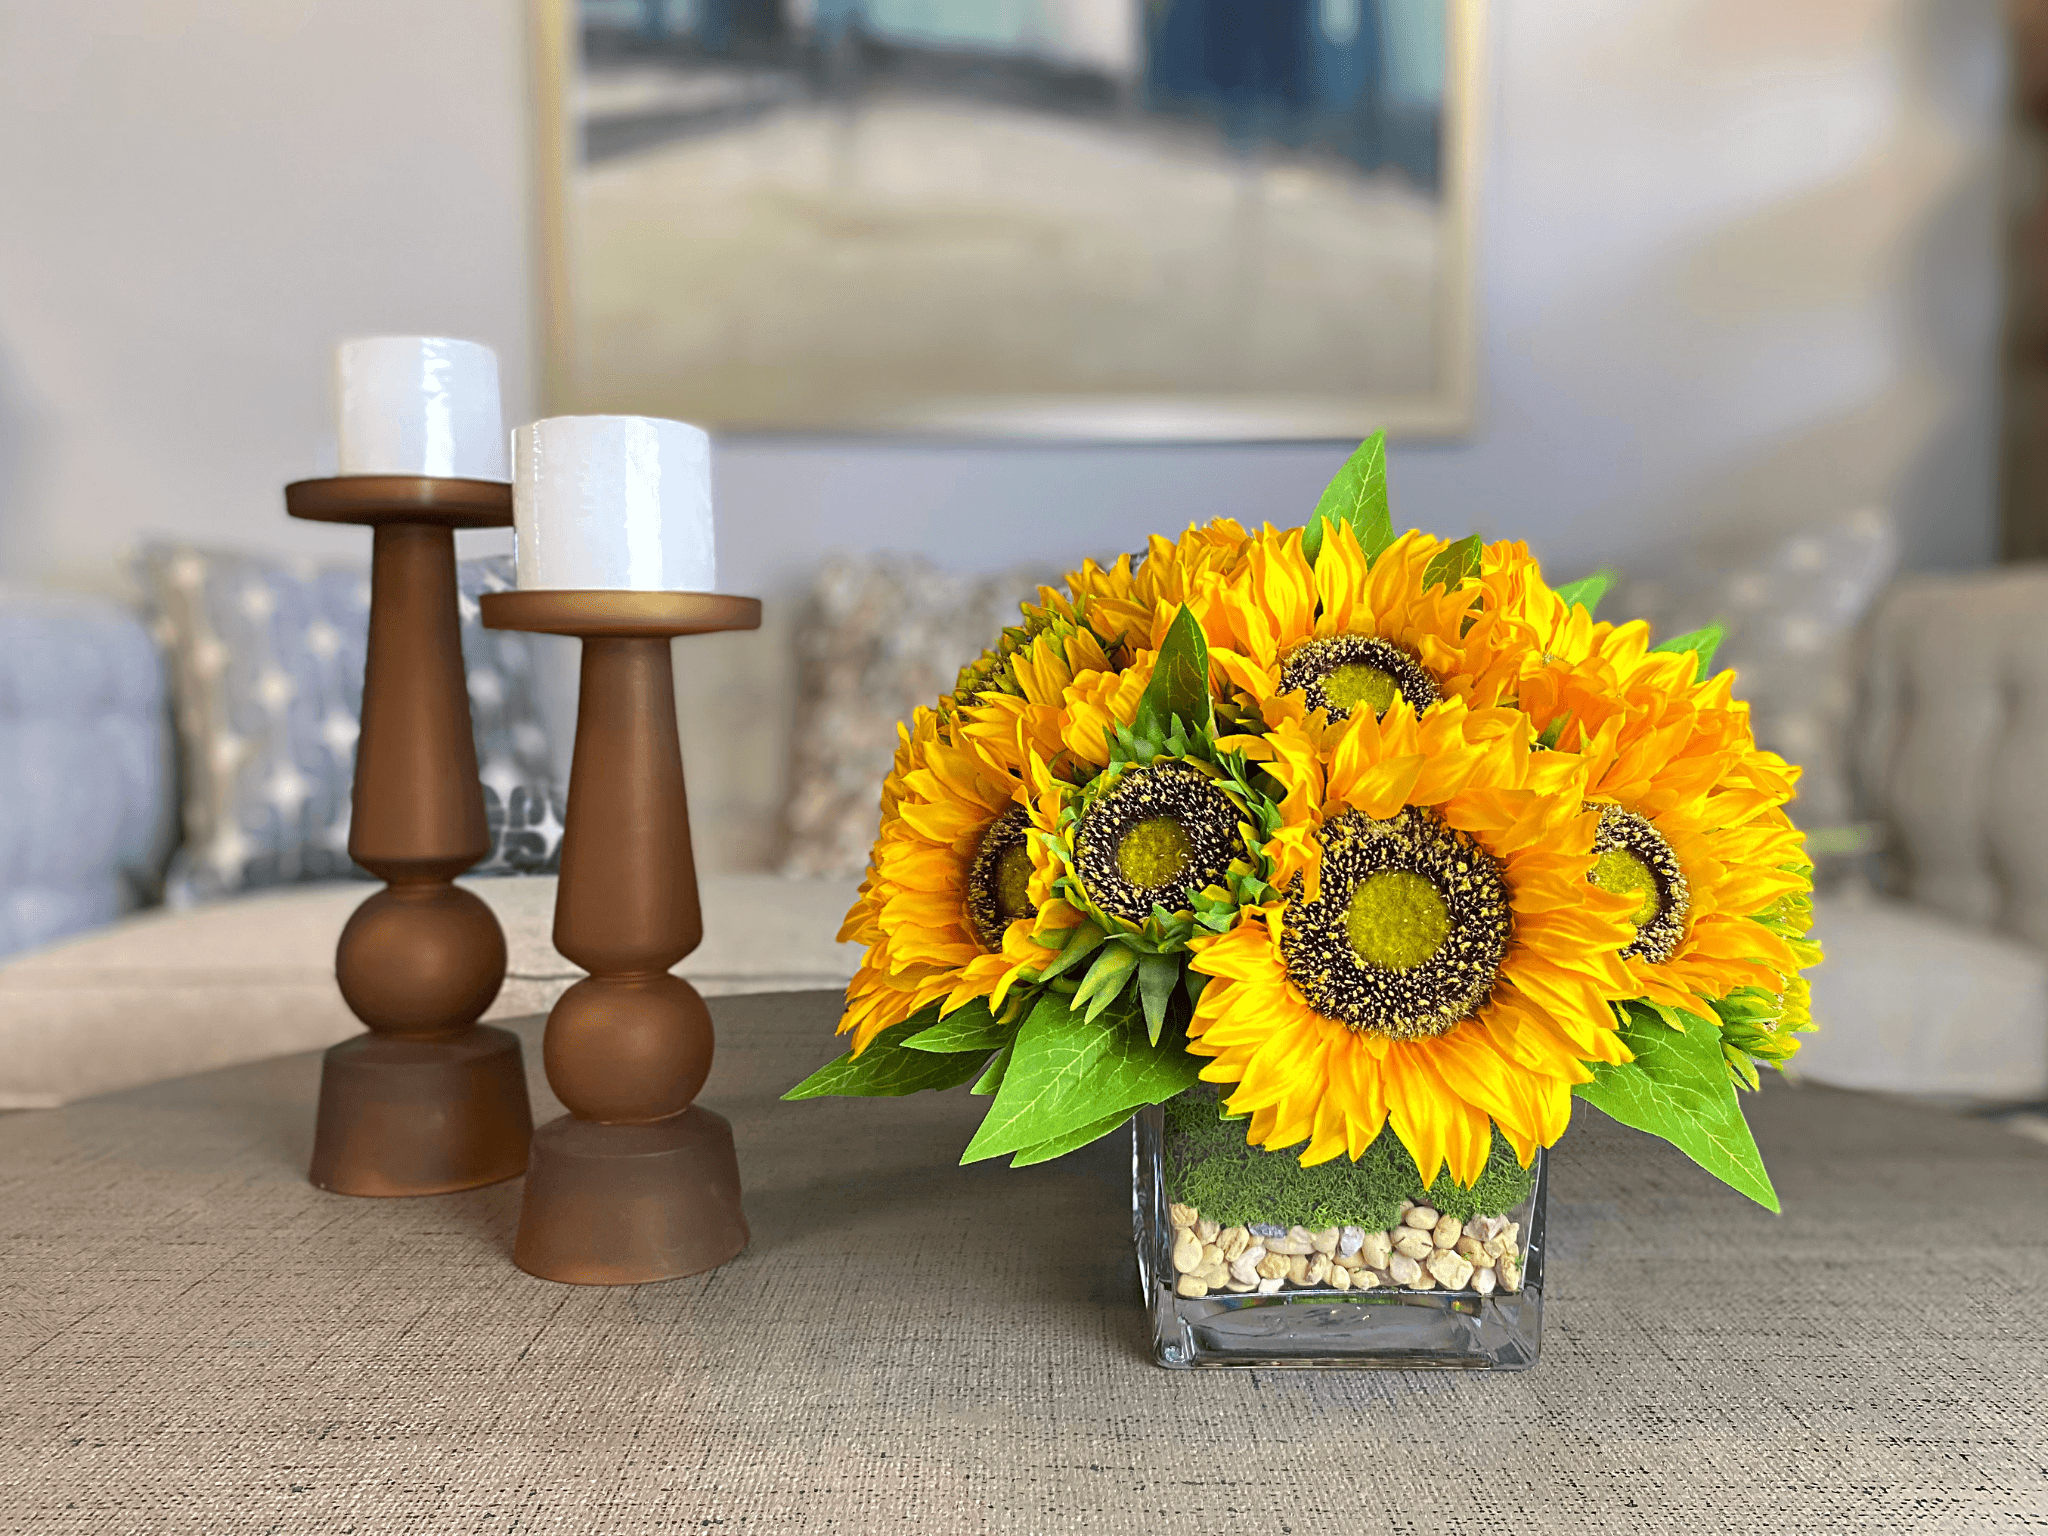 Creative Displays Sunflower Arrangement in a Square Glass Vase with Stones